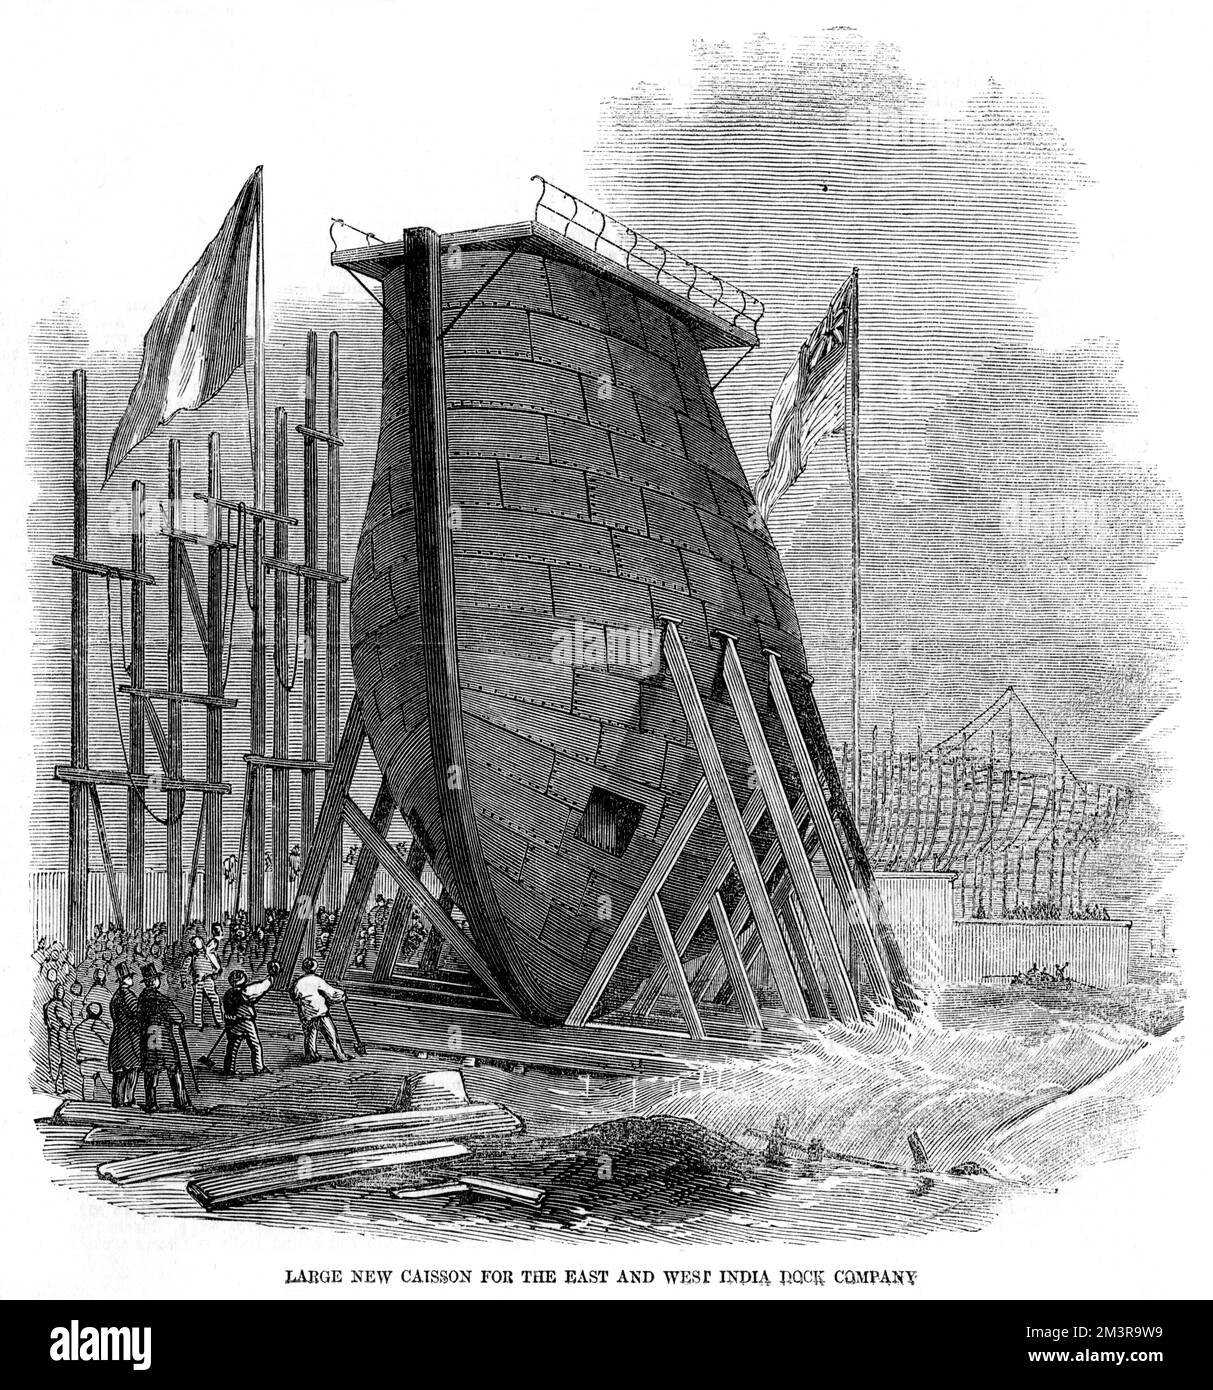 New Caisson for the East and West India Dock Company - intended to divide the East and West India Export Dock from the basin - built by Messrs. Westwood, Baillie and Campbell, of Ldon-yard, Isle of Dogs from designs by Messrs. Martin, engineers to the Dock Company.     Date: 1857 Stock Photo